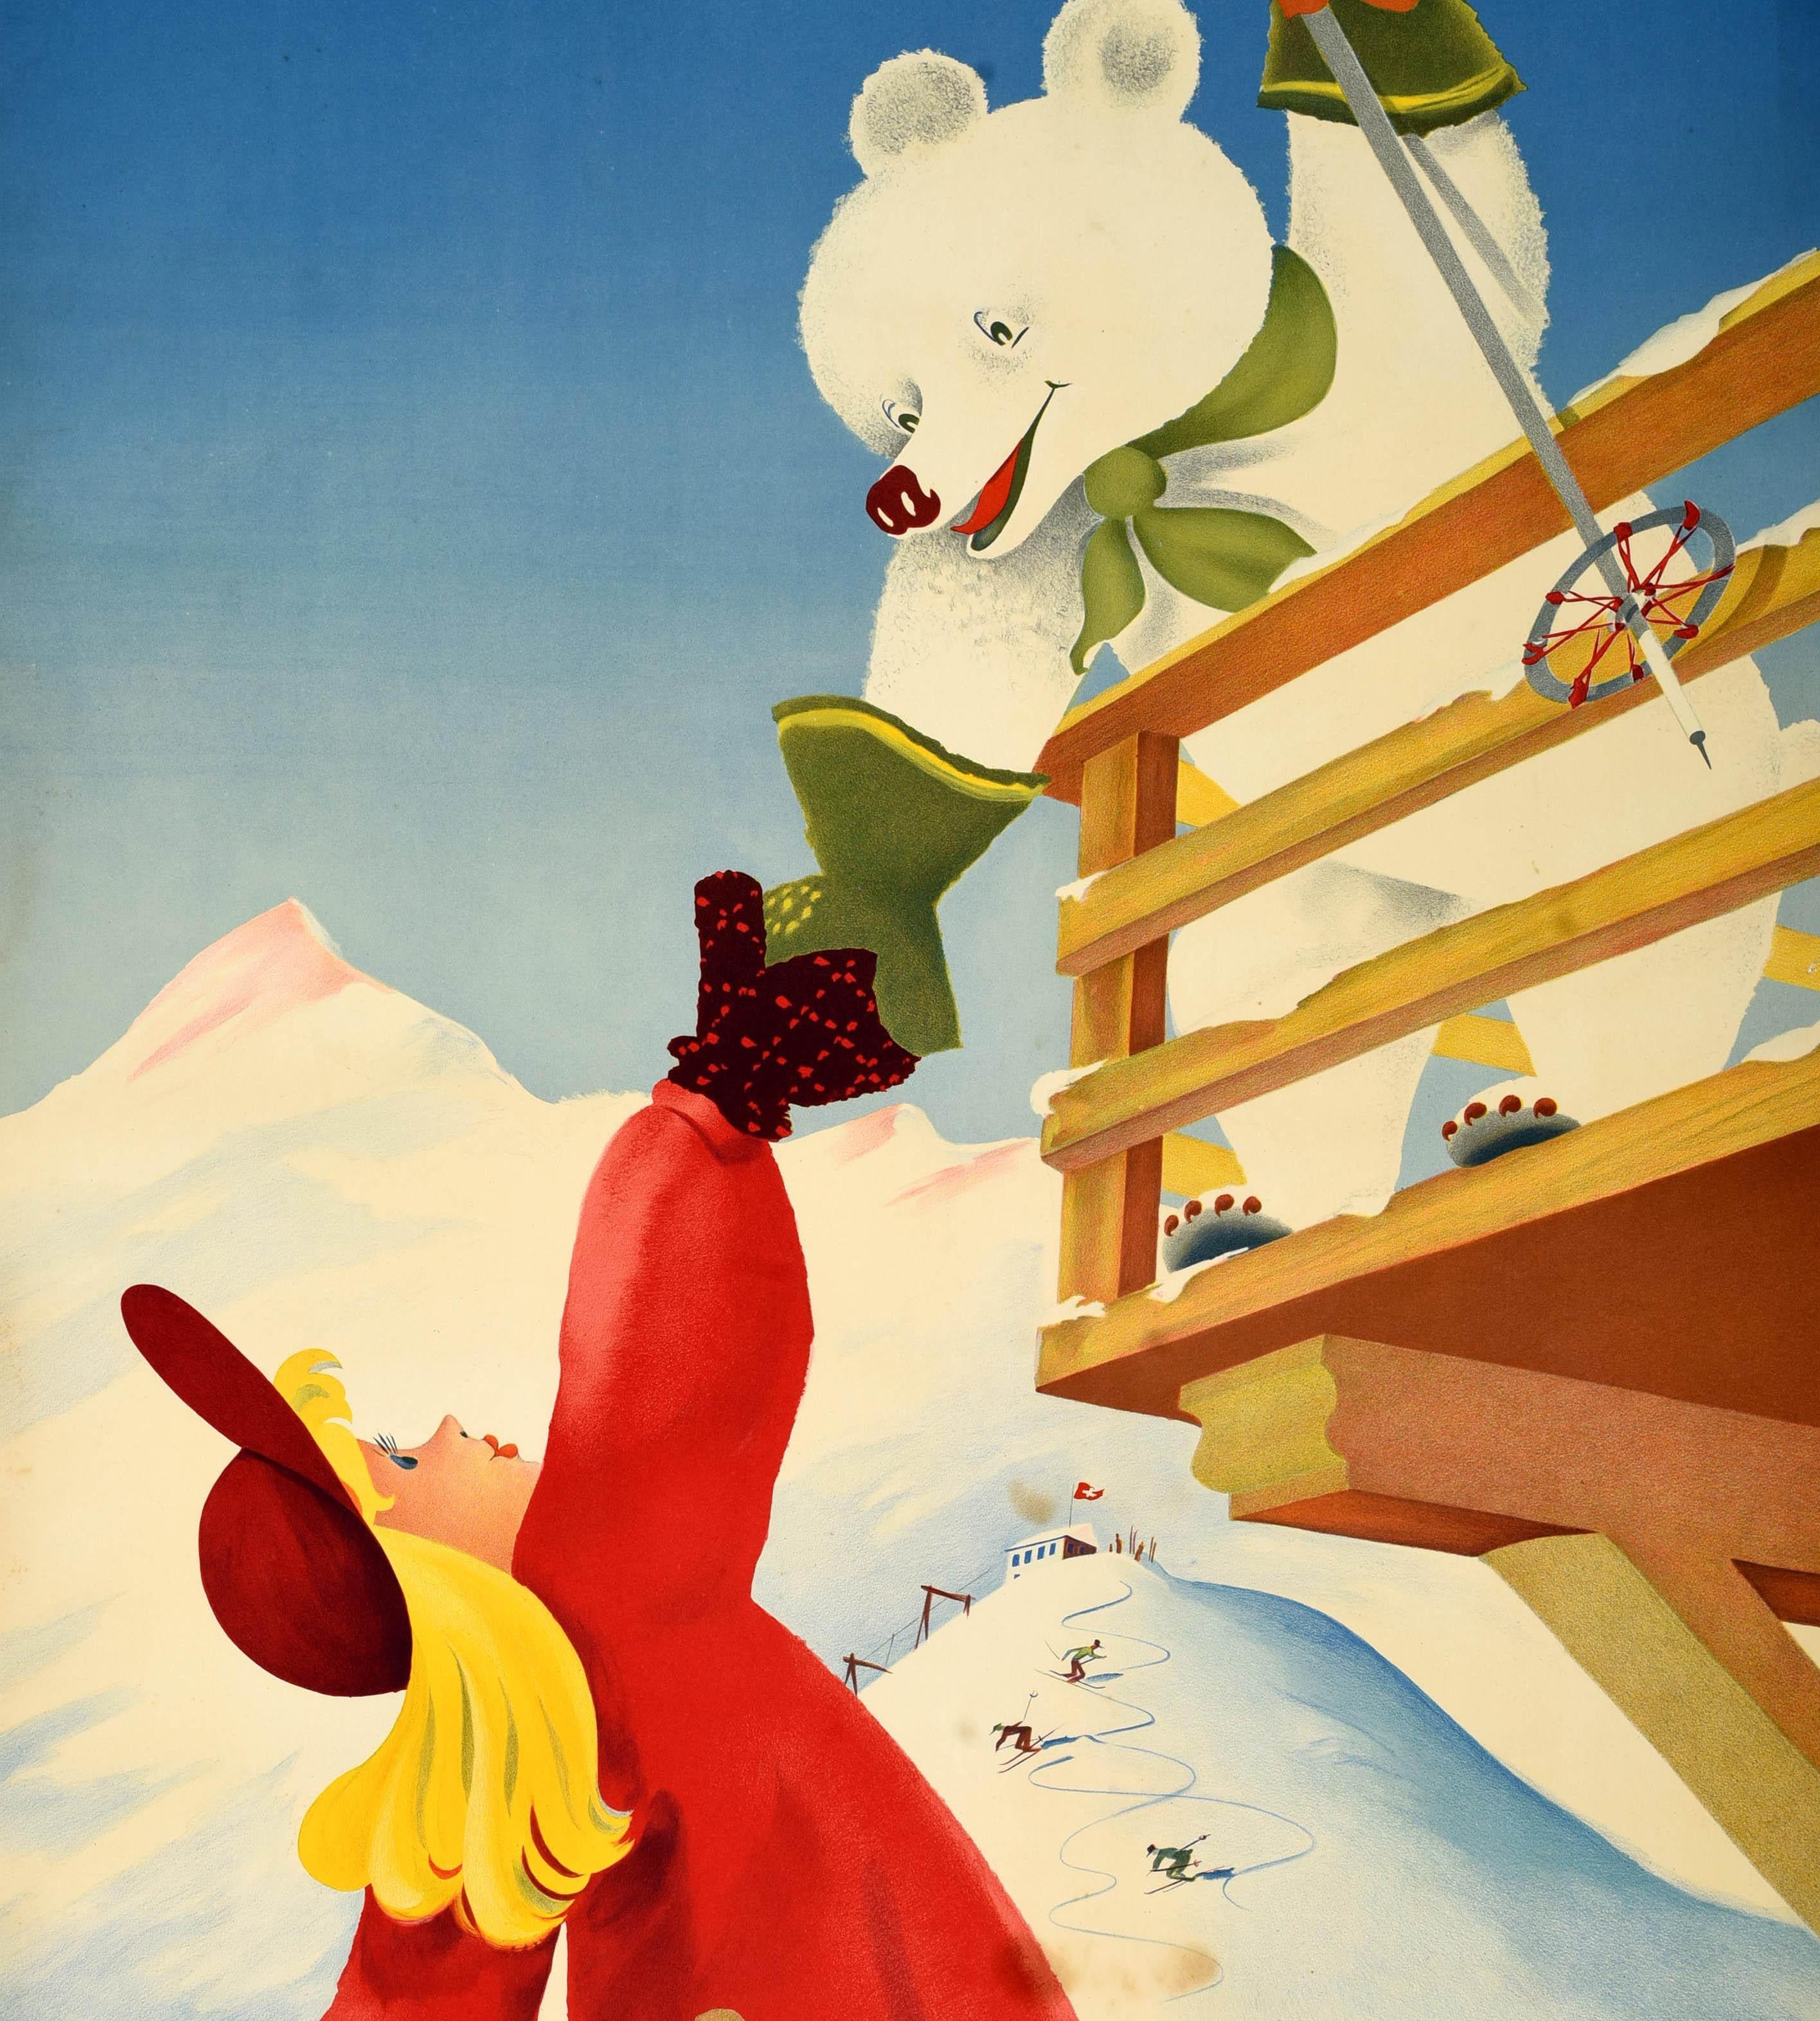 Original vintage winter sport travel poster for Berner Oberland Suisse on y fait du ski jusqu'a fin Avril / Bernese Oberland Switzerland skiing until the end of April featuring fun artwork by Paul Gusset (1909-1975) depicting a smiling white polar